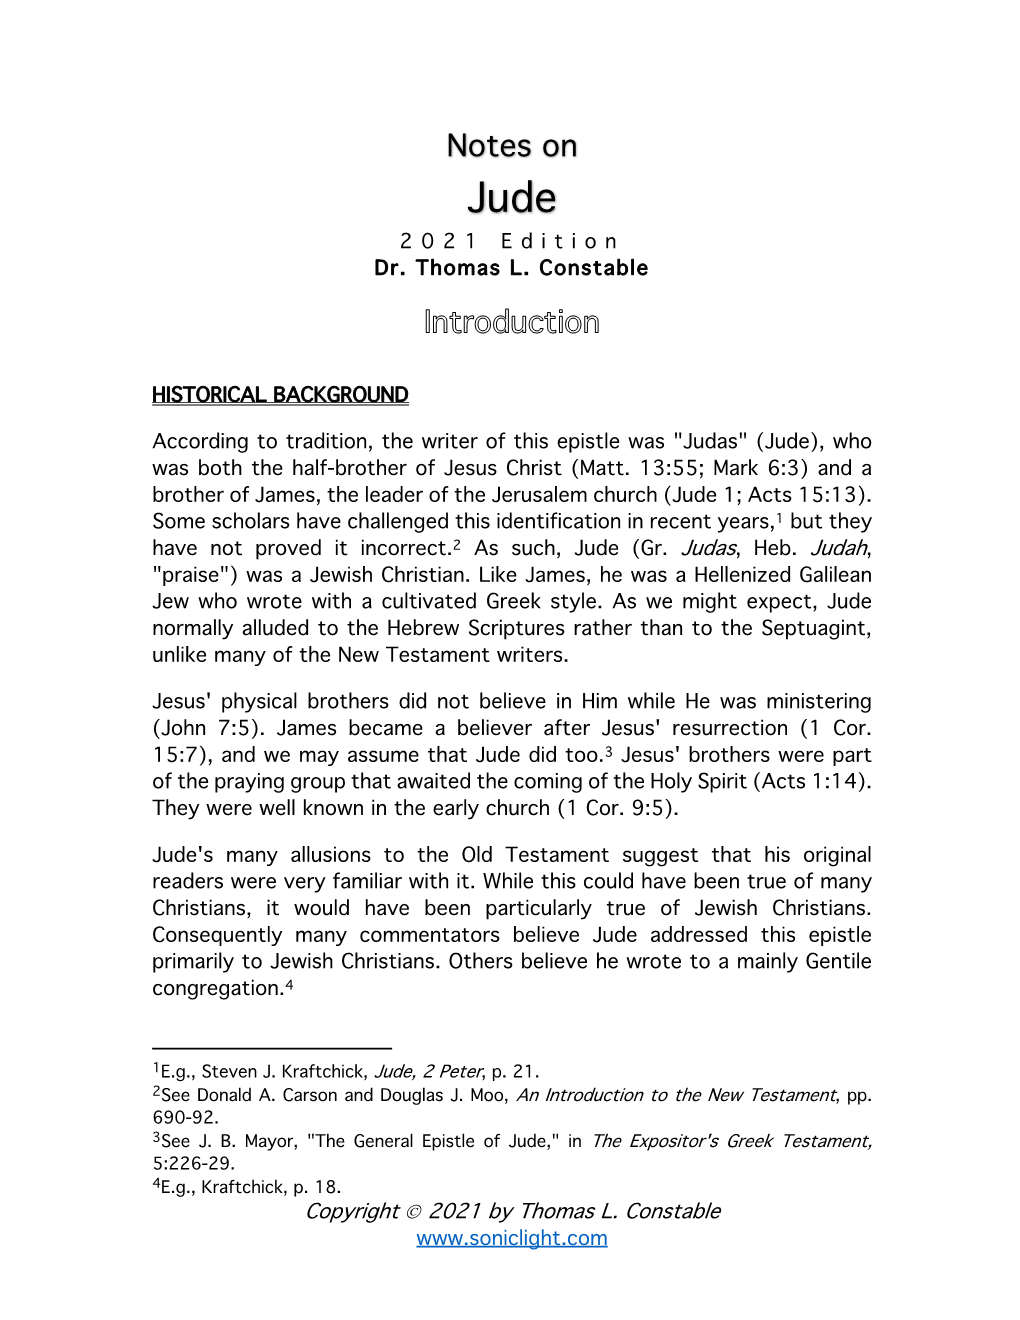 Notes on Jude 202 1 Edition Dr